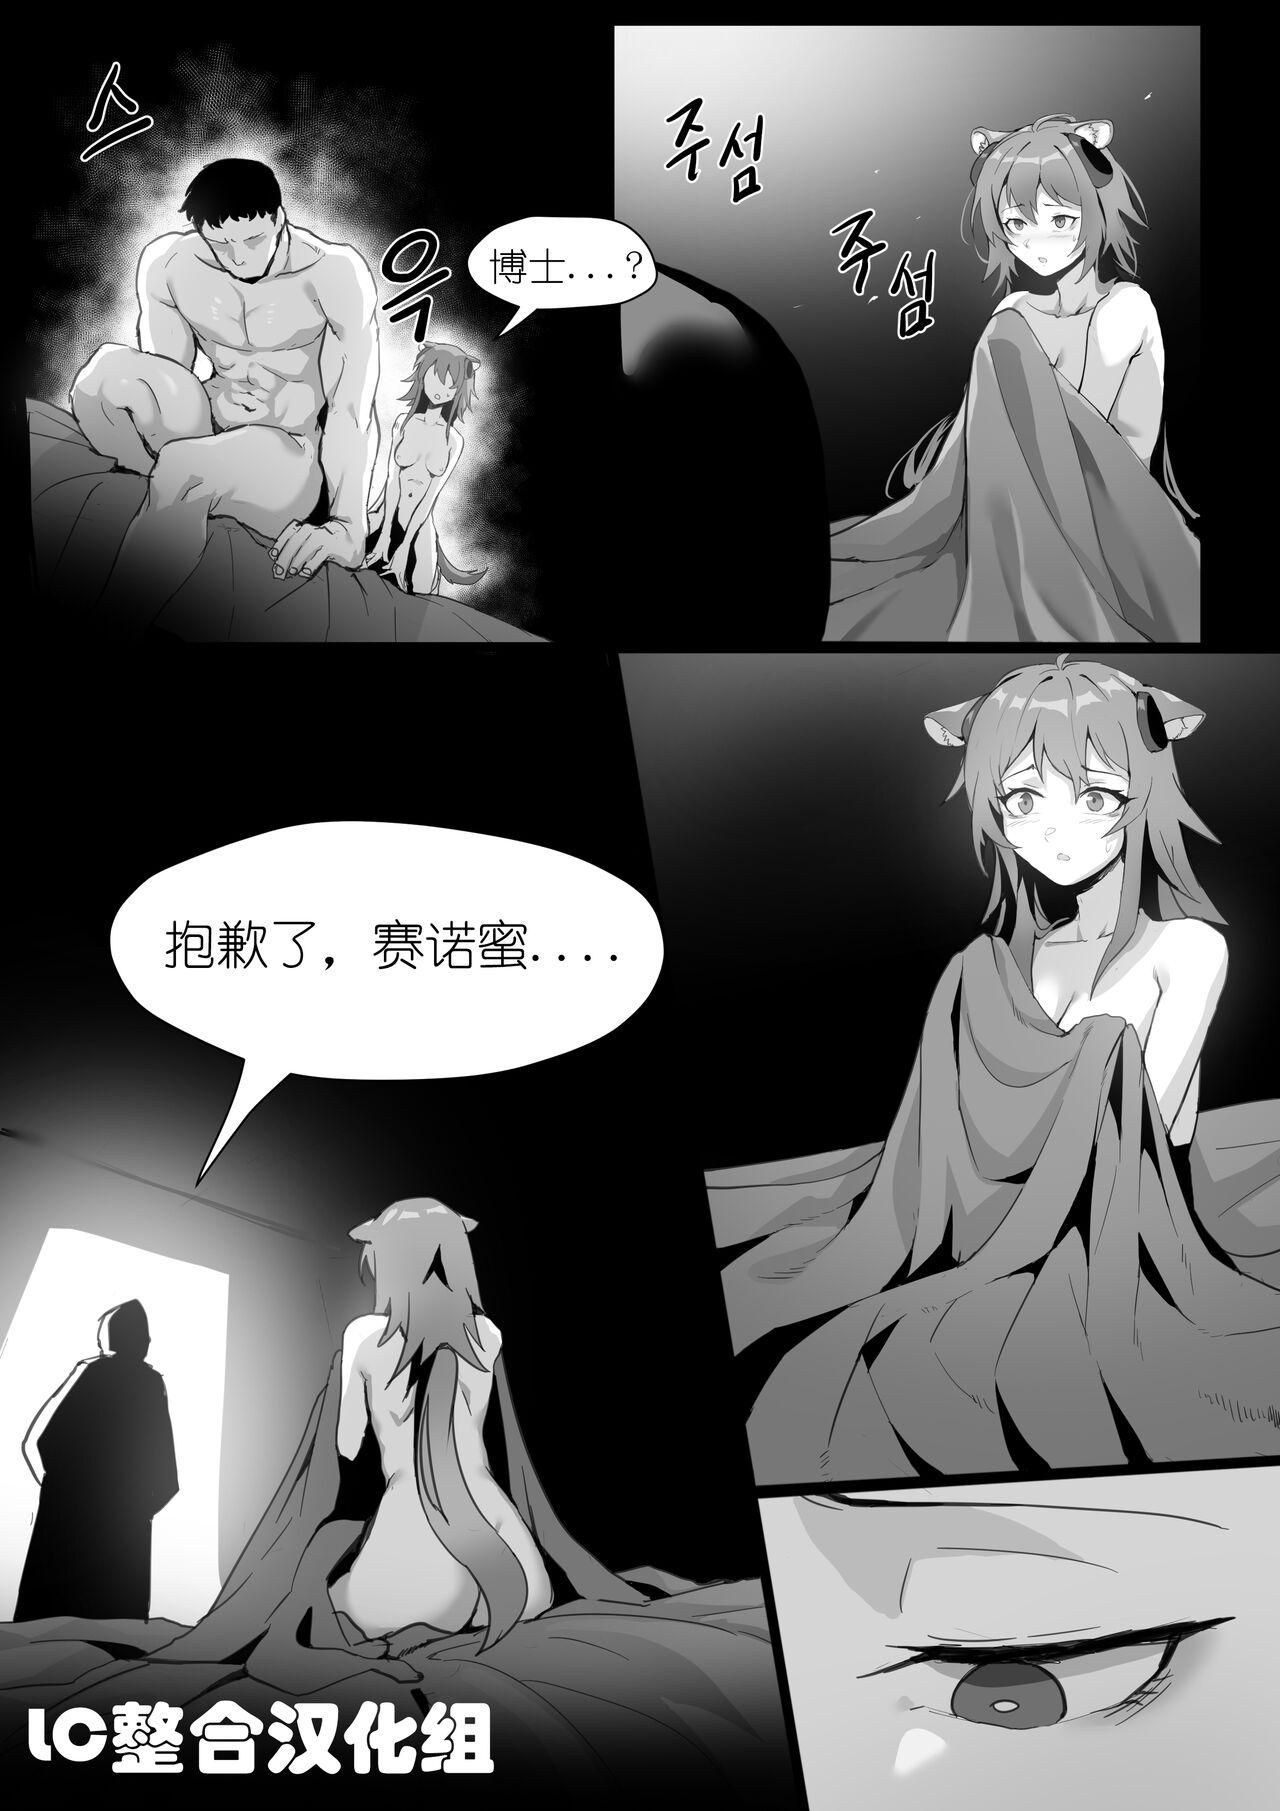 Jerkoff 欲望方舟记录3 - Arknights Freckles - Page 5